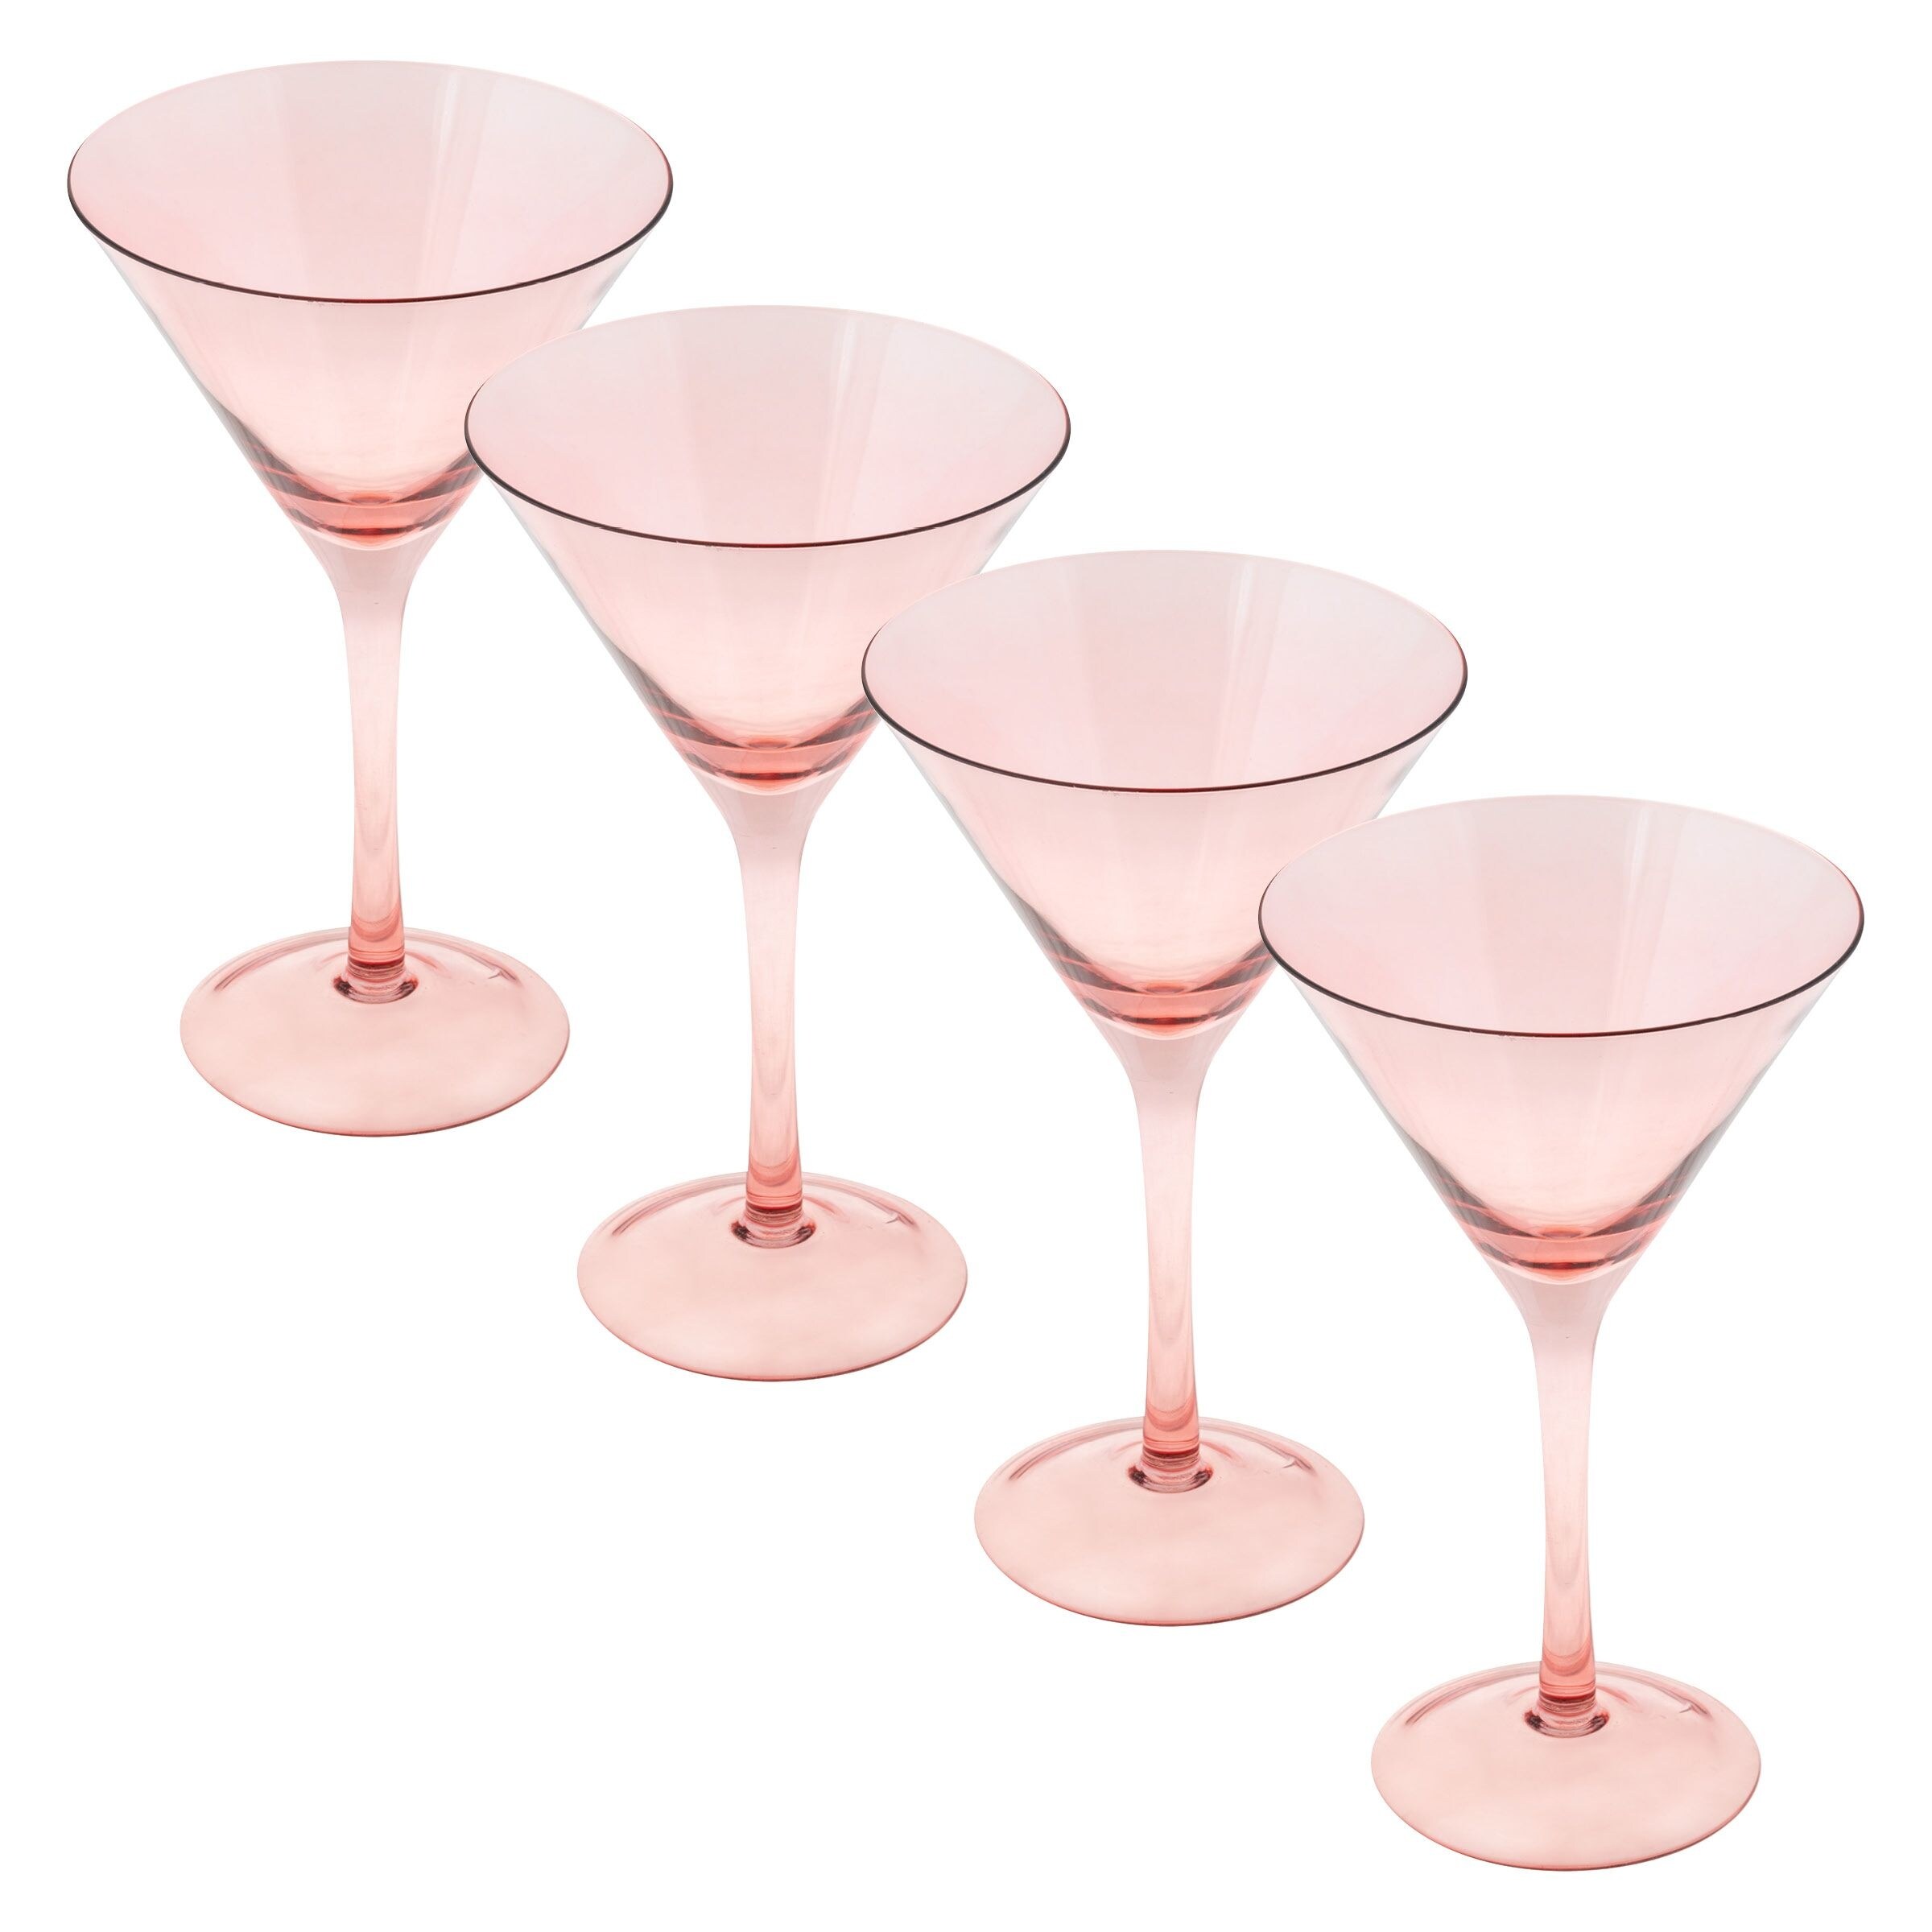 https://ak1.ostkcdn.com/images/products/is/images/direct/6a78d0830ebb1a9de088e7b6bffef73e8cbf3e26/Karma-Mid-Century-Martini-Glass-Set.jpg